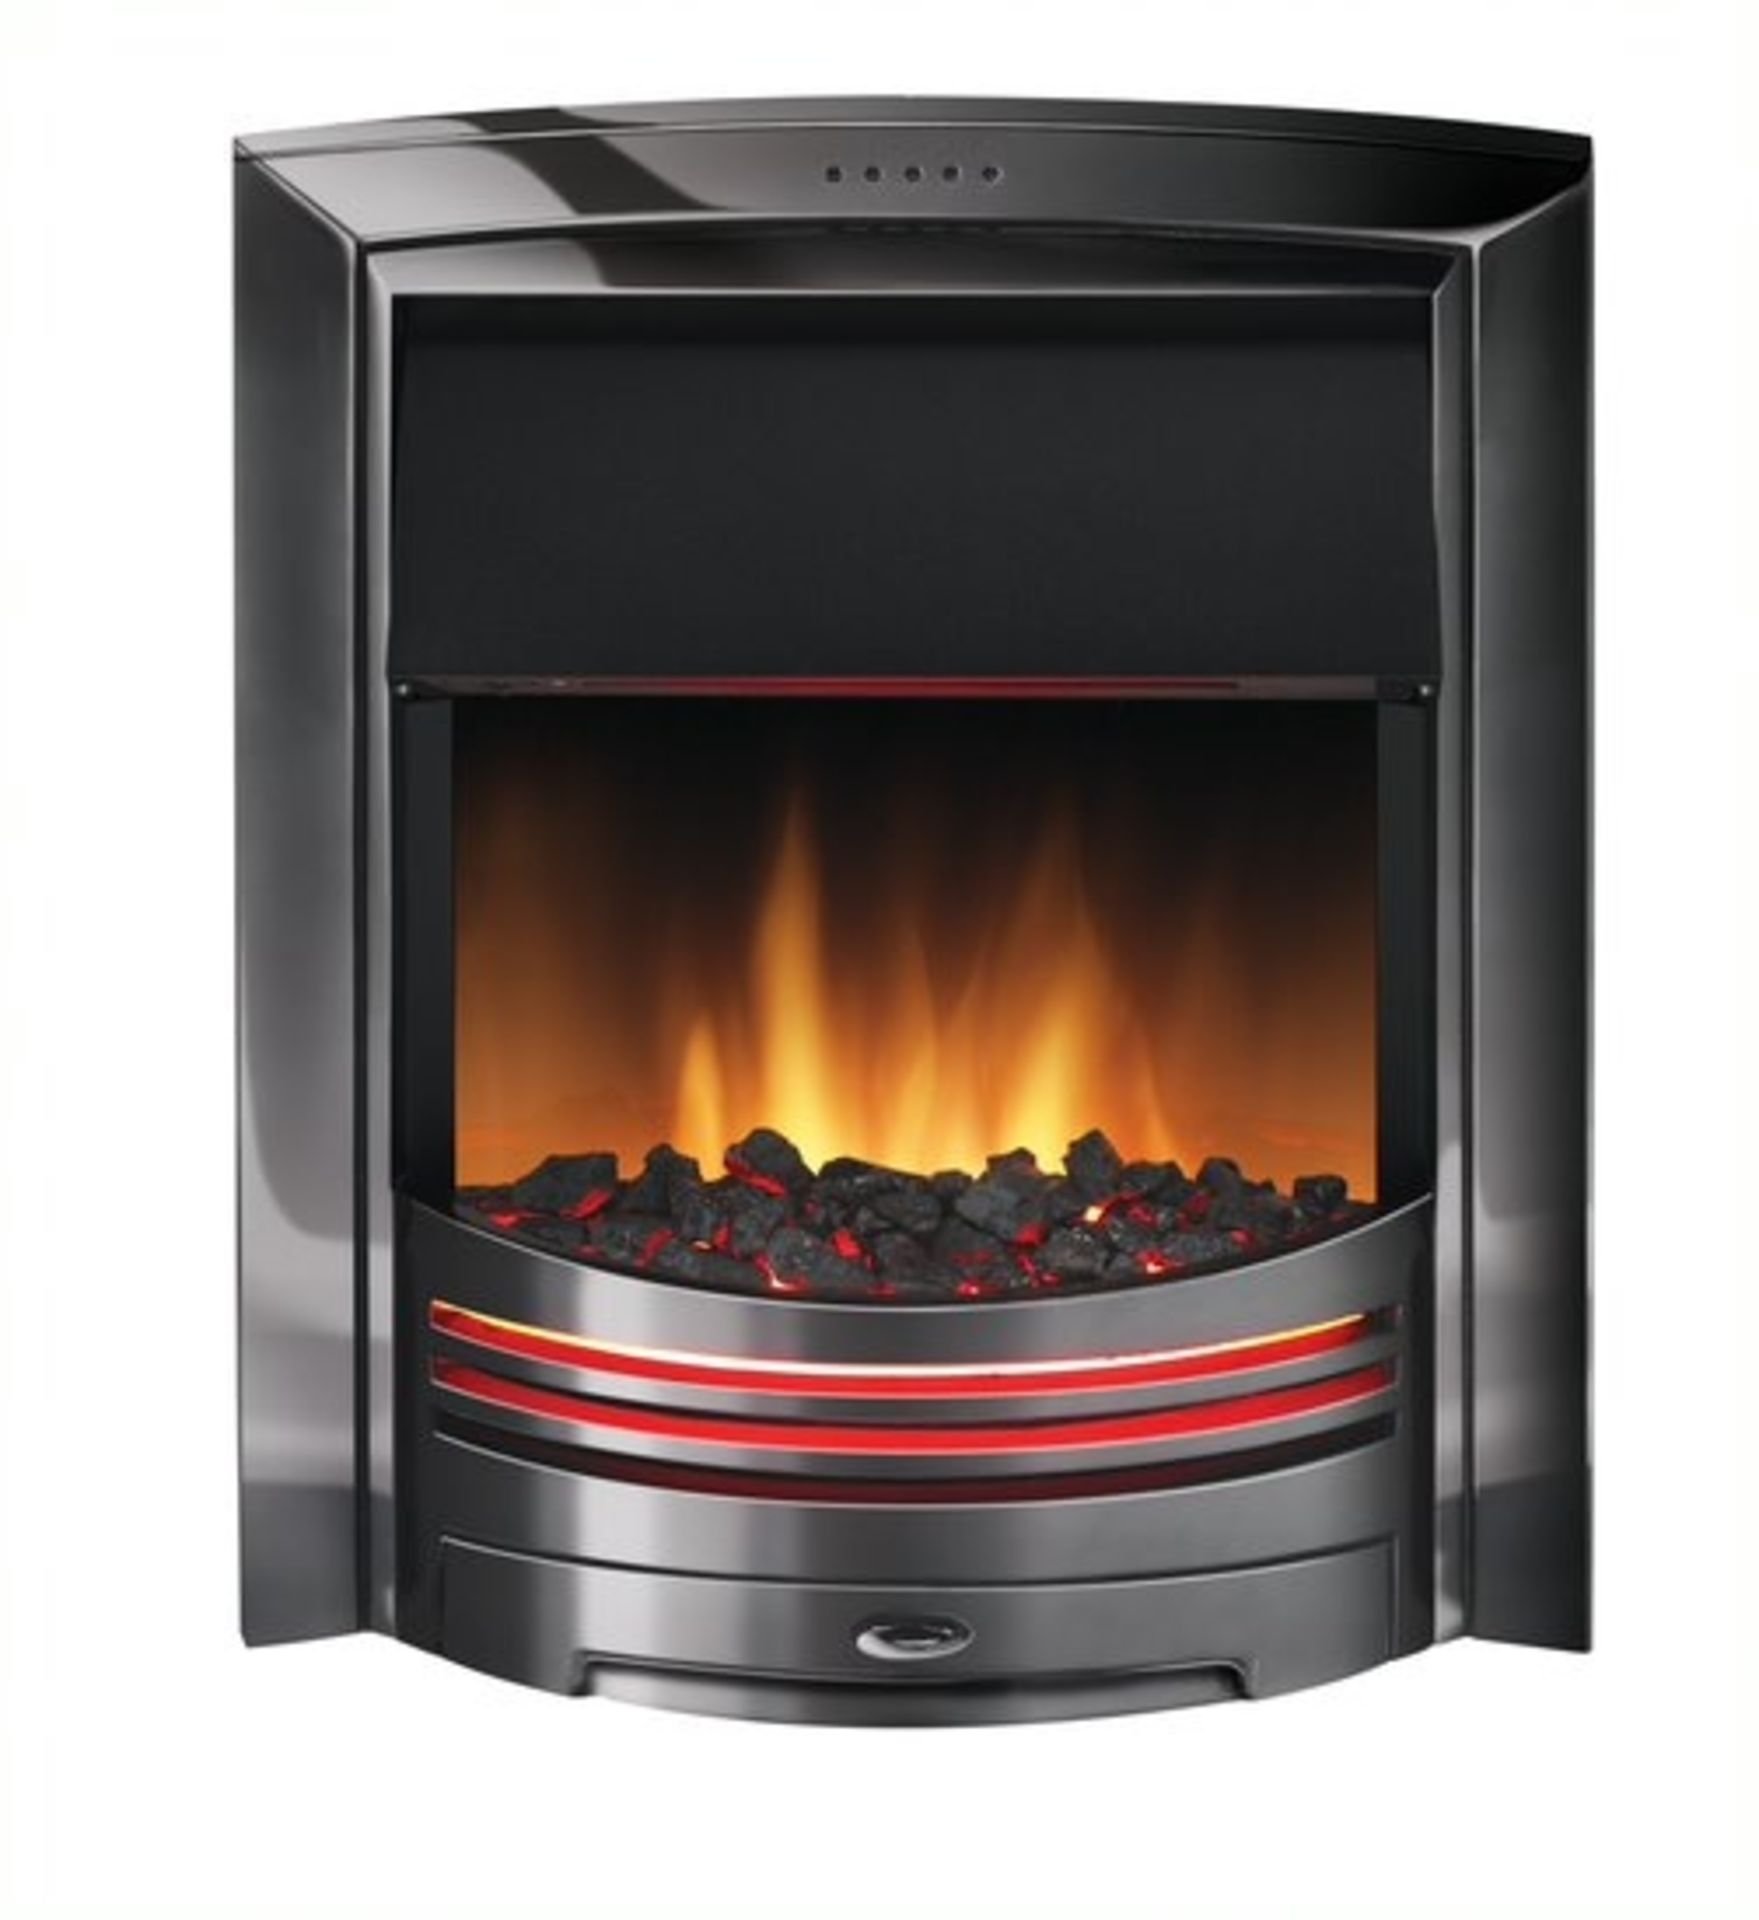 1 x BRAND NEW BOXED Dimplex Adagio Black Nickel Optiflame Electric Inset Fire. RRP £520.00. A - Image 2 of 2